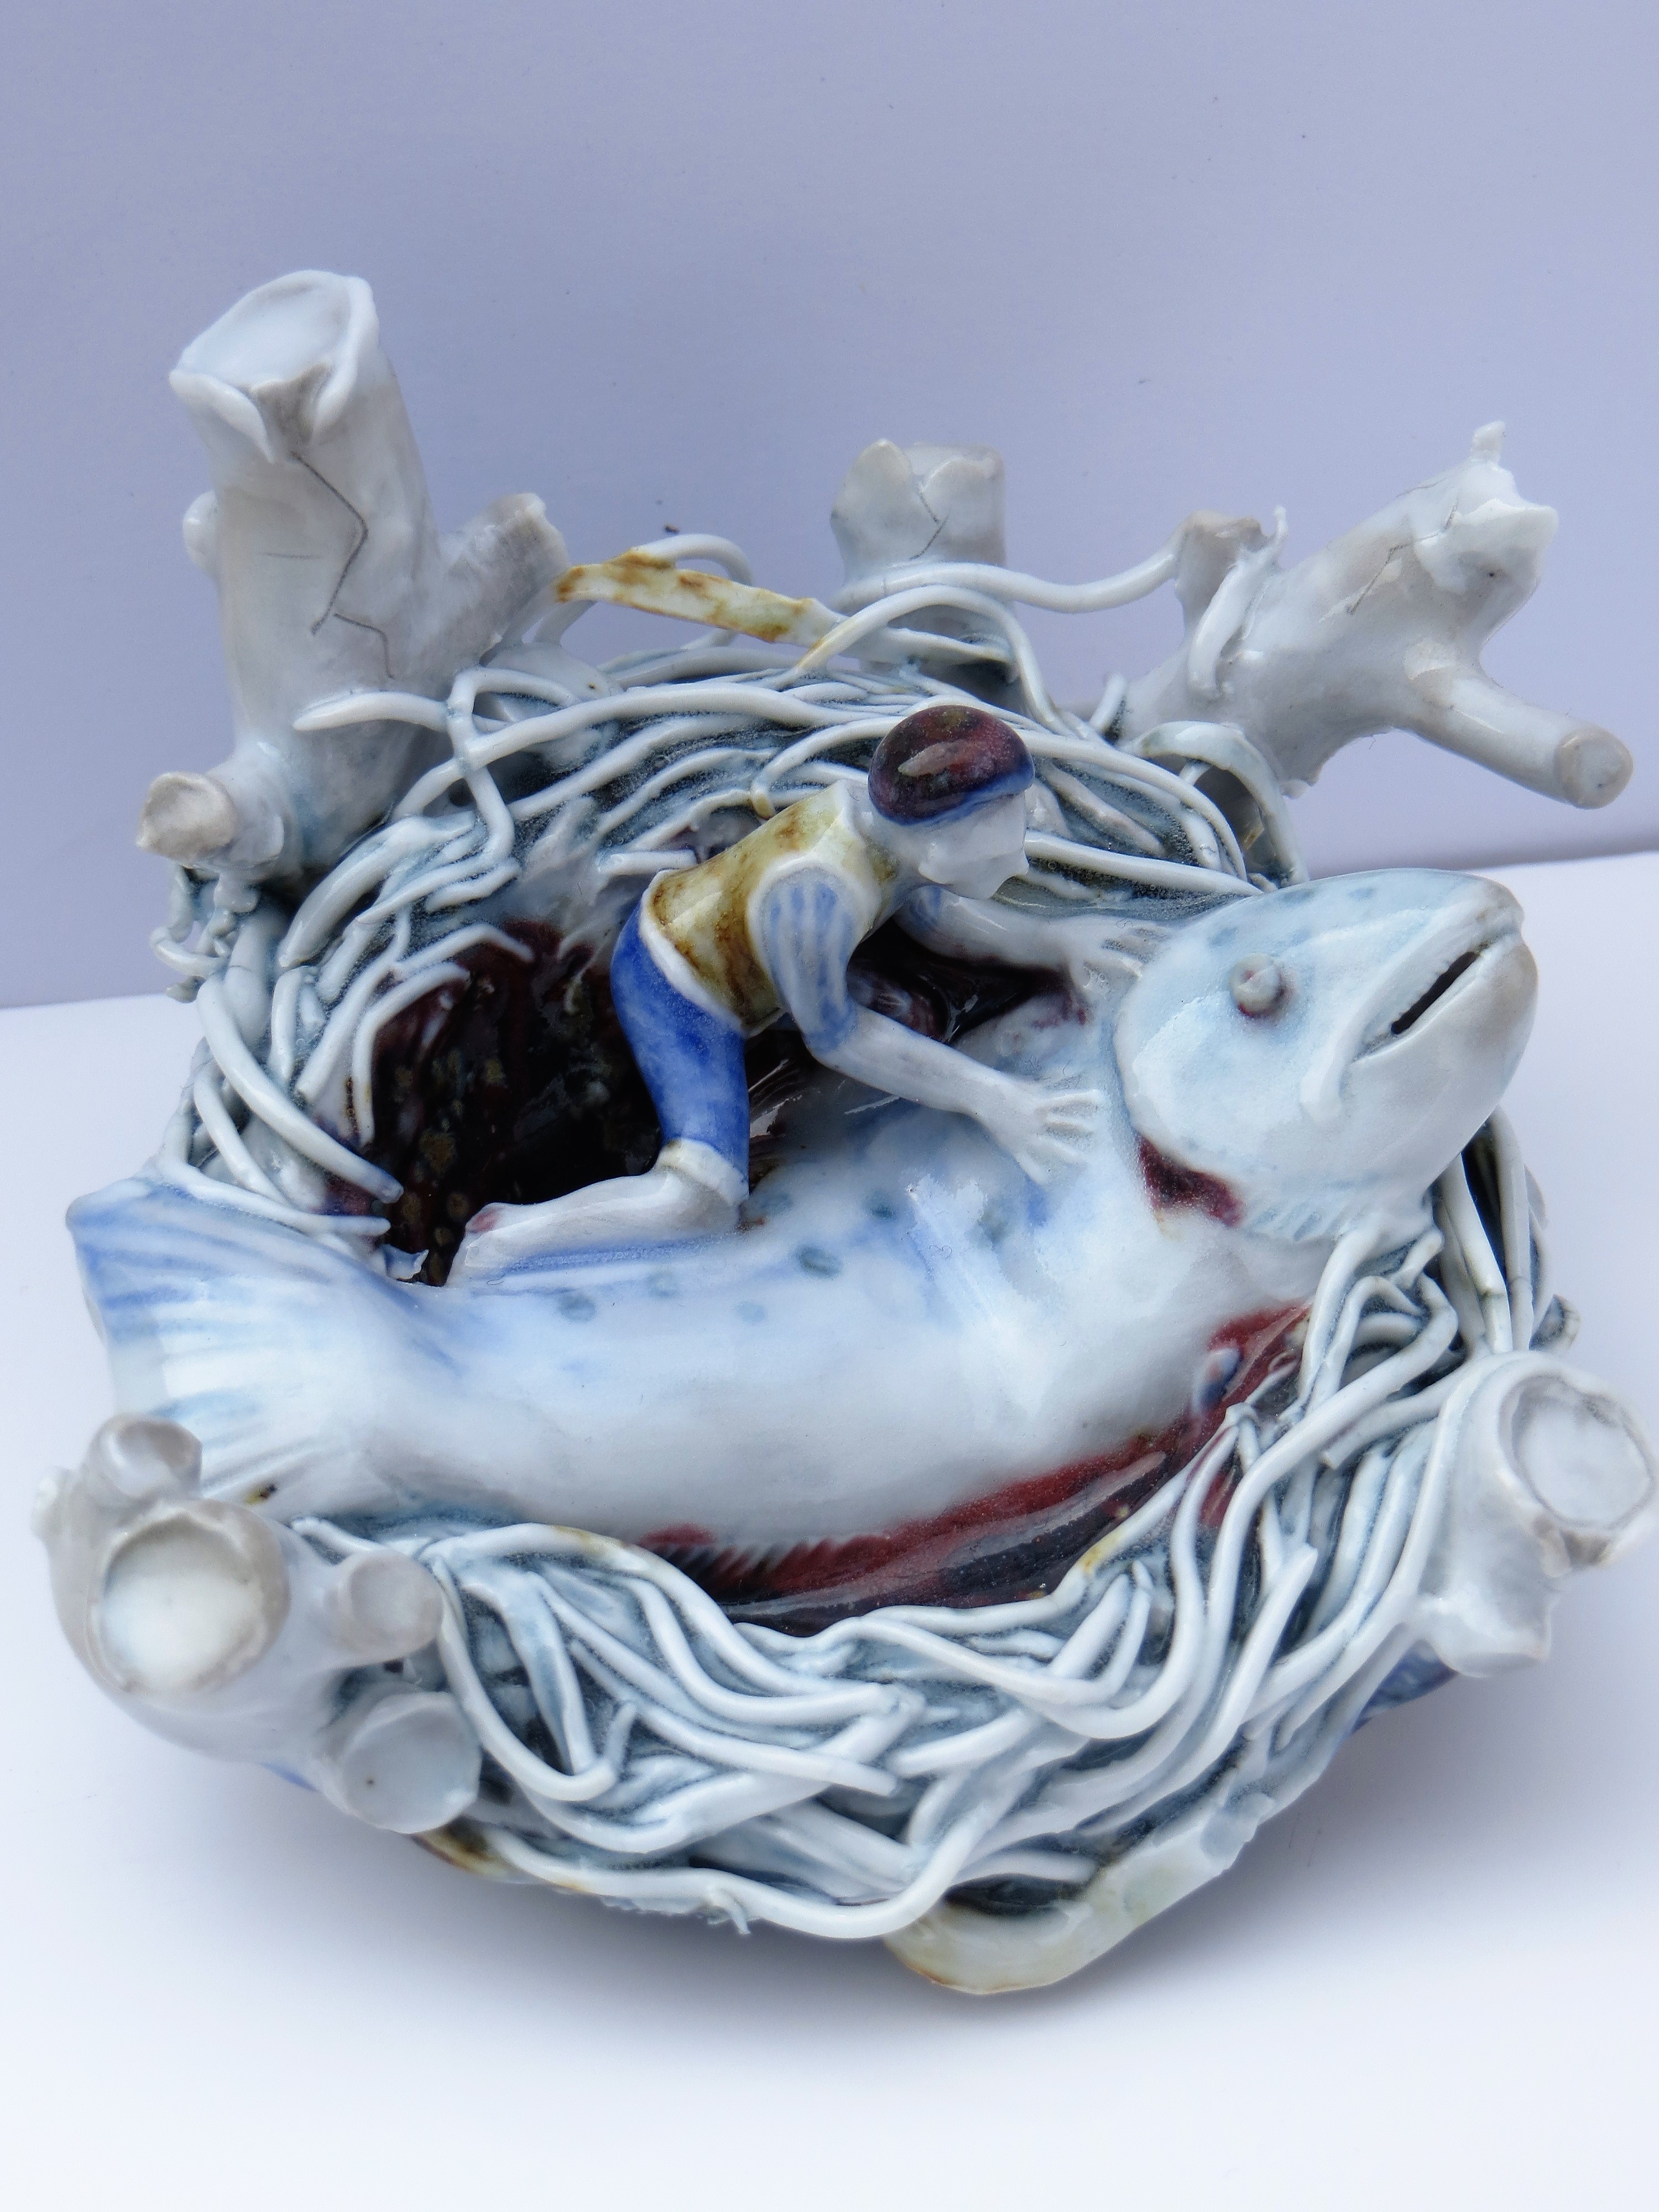 Nest of Compassion (Private Collection)